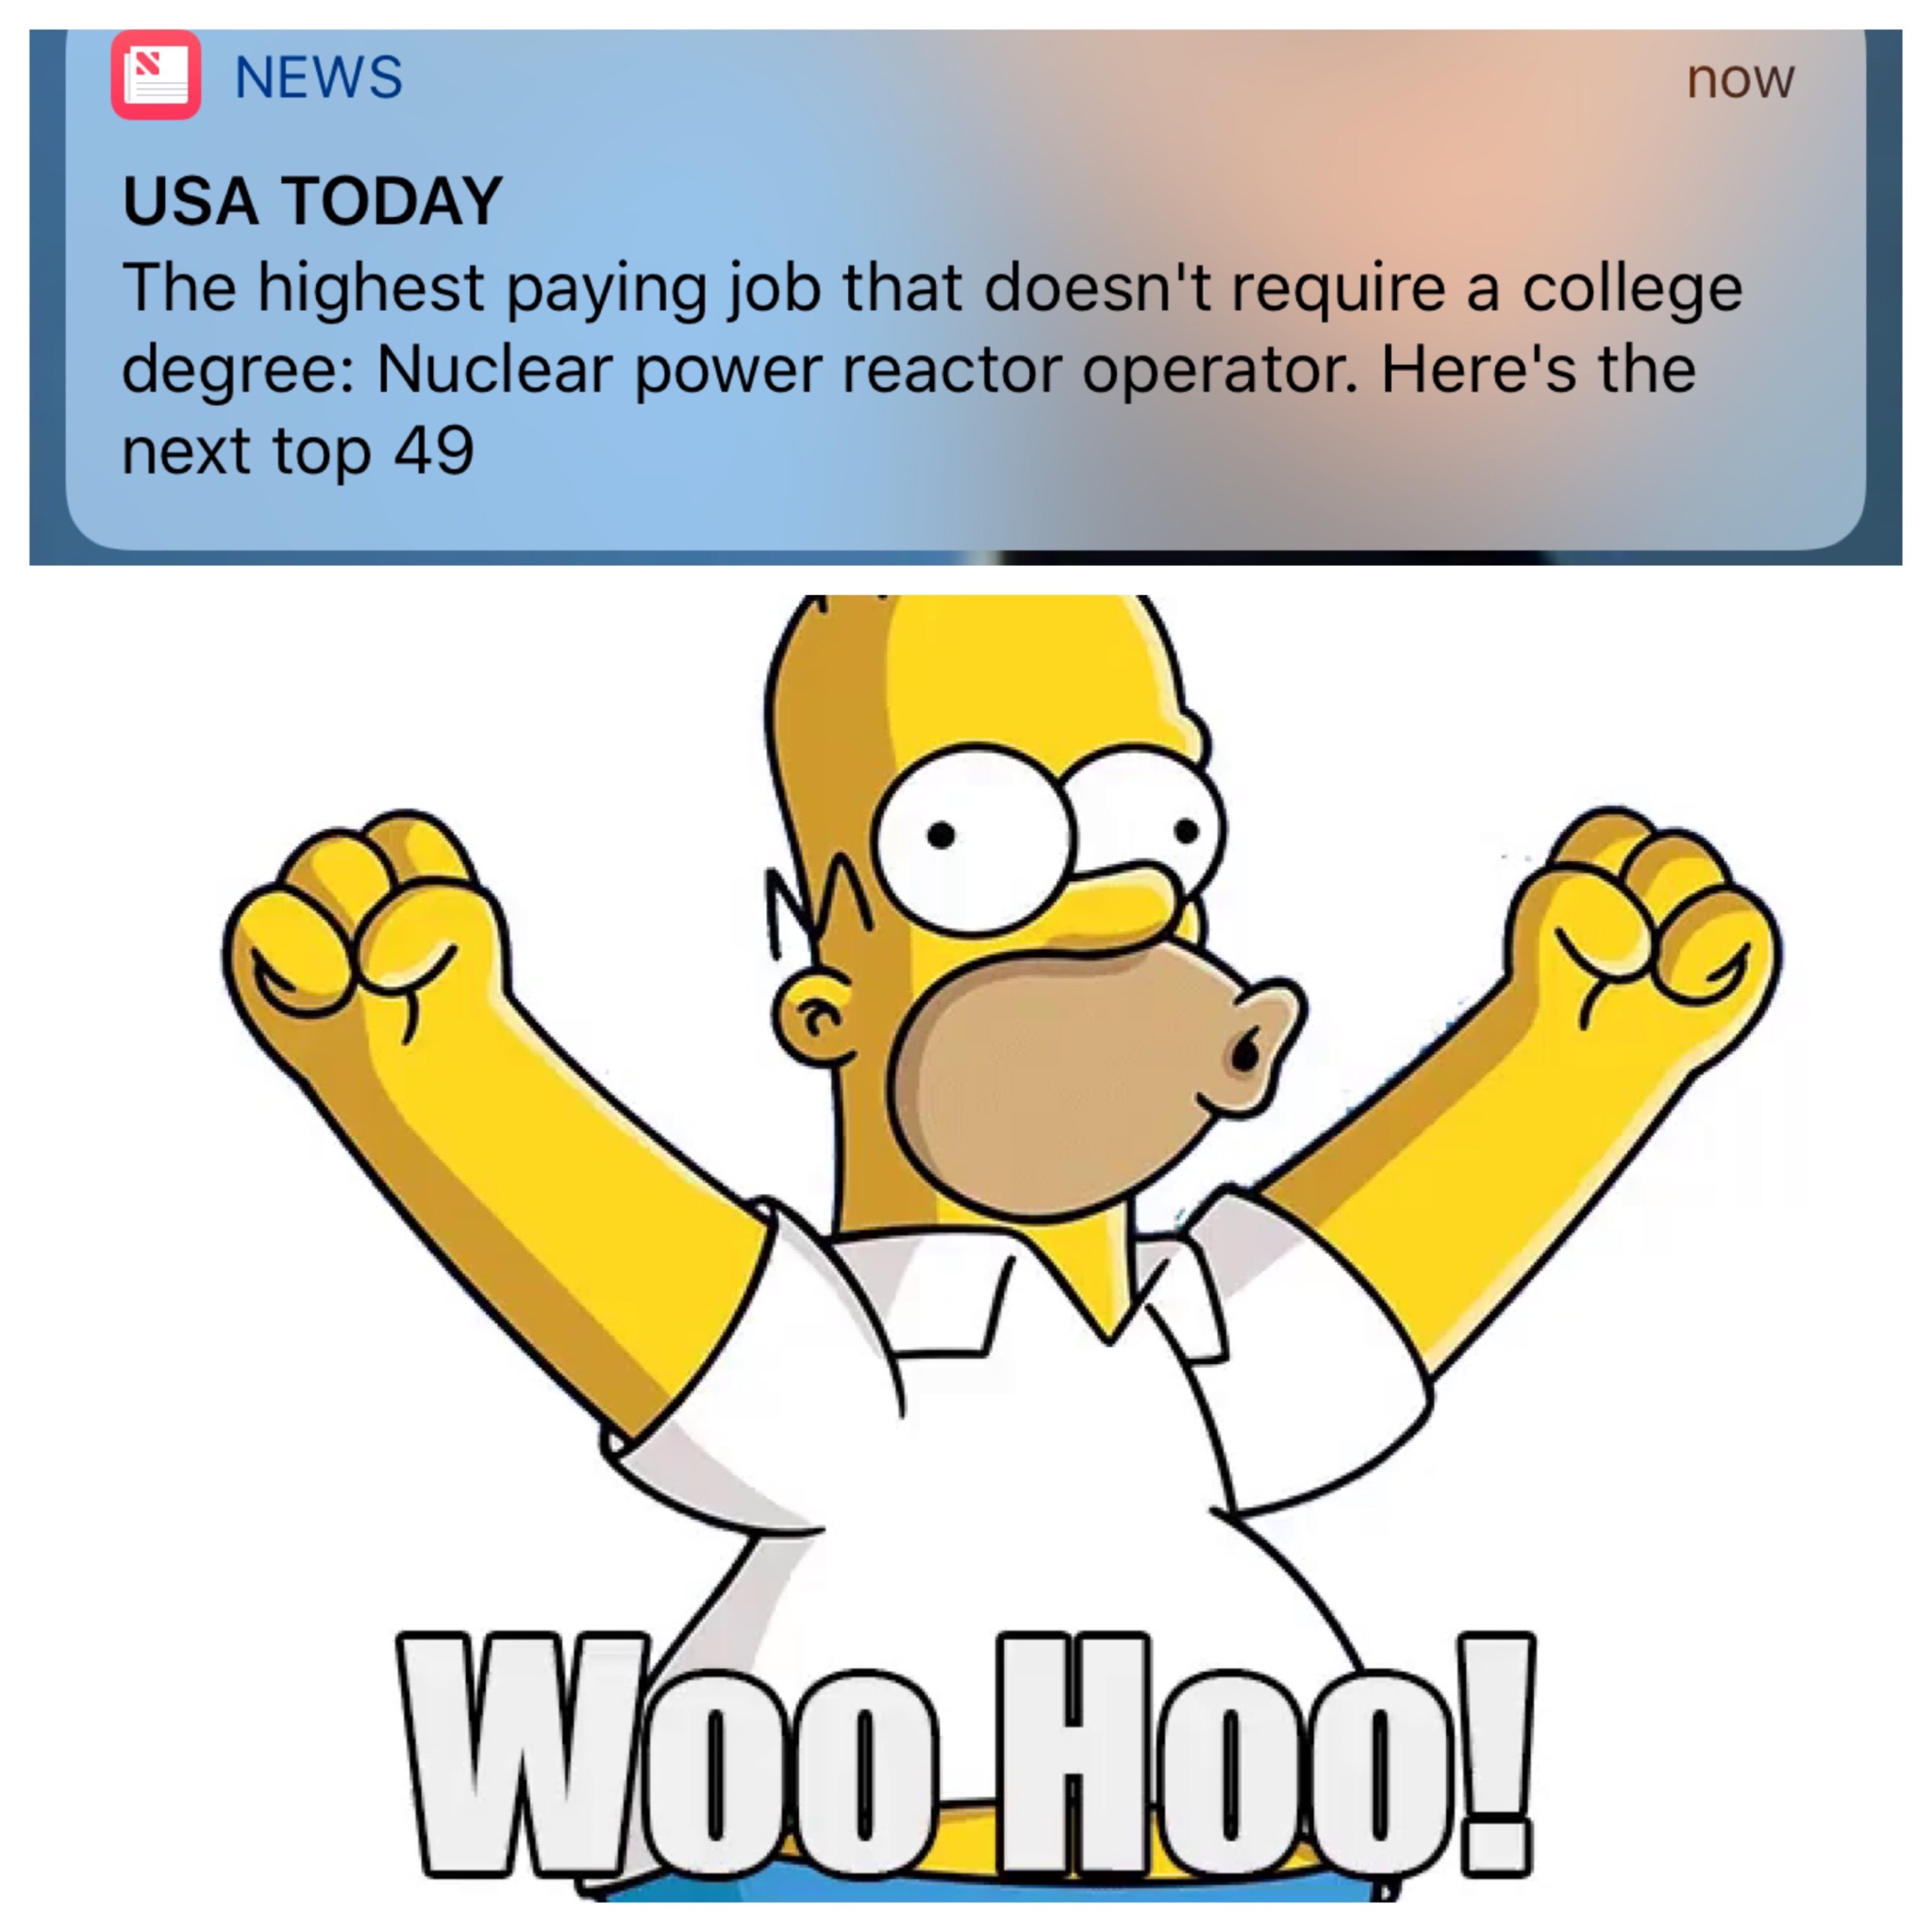 meme - homer simpson - News now Usa Today The highest paying job that doesn't require a college degree Nuclear power reactor operator. Here's the next top 49 Woo Hoo!